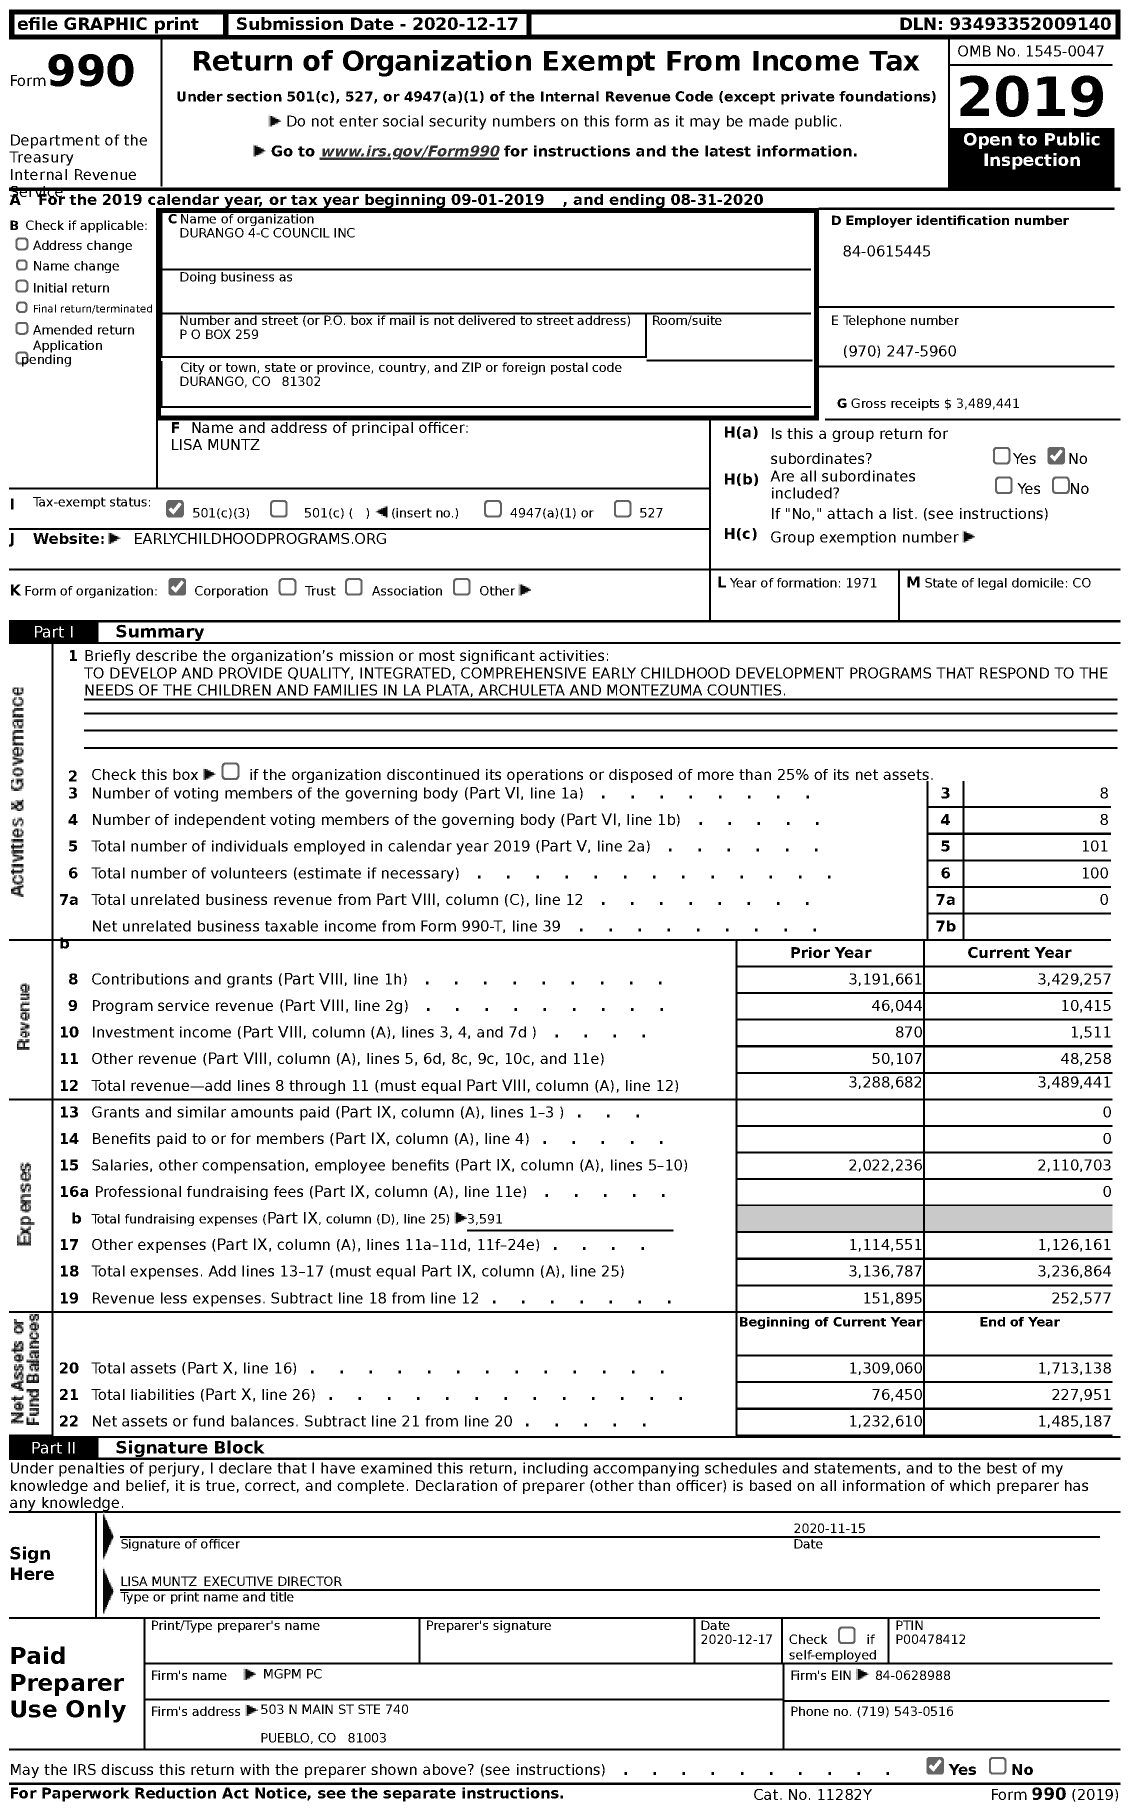 Image of first page of 2019 Form 990 for Durango 4-c Council